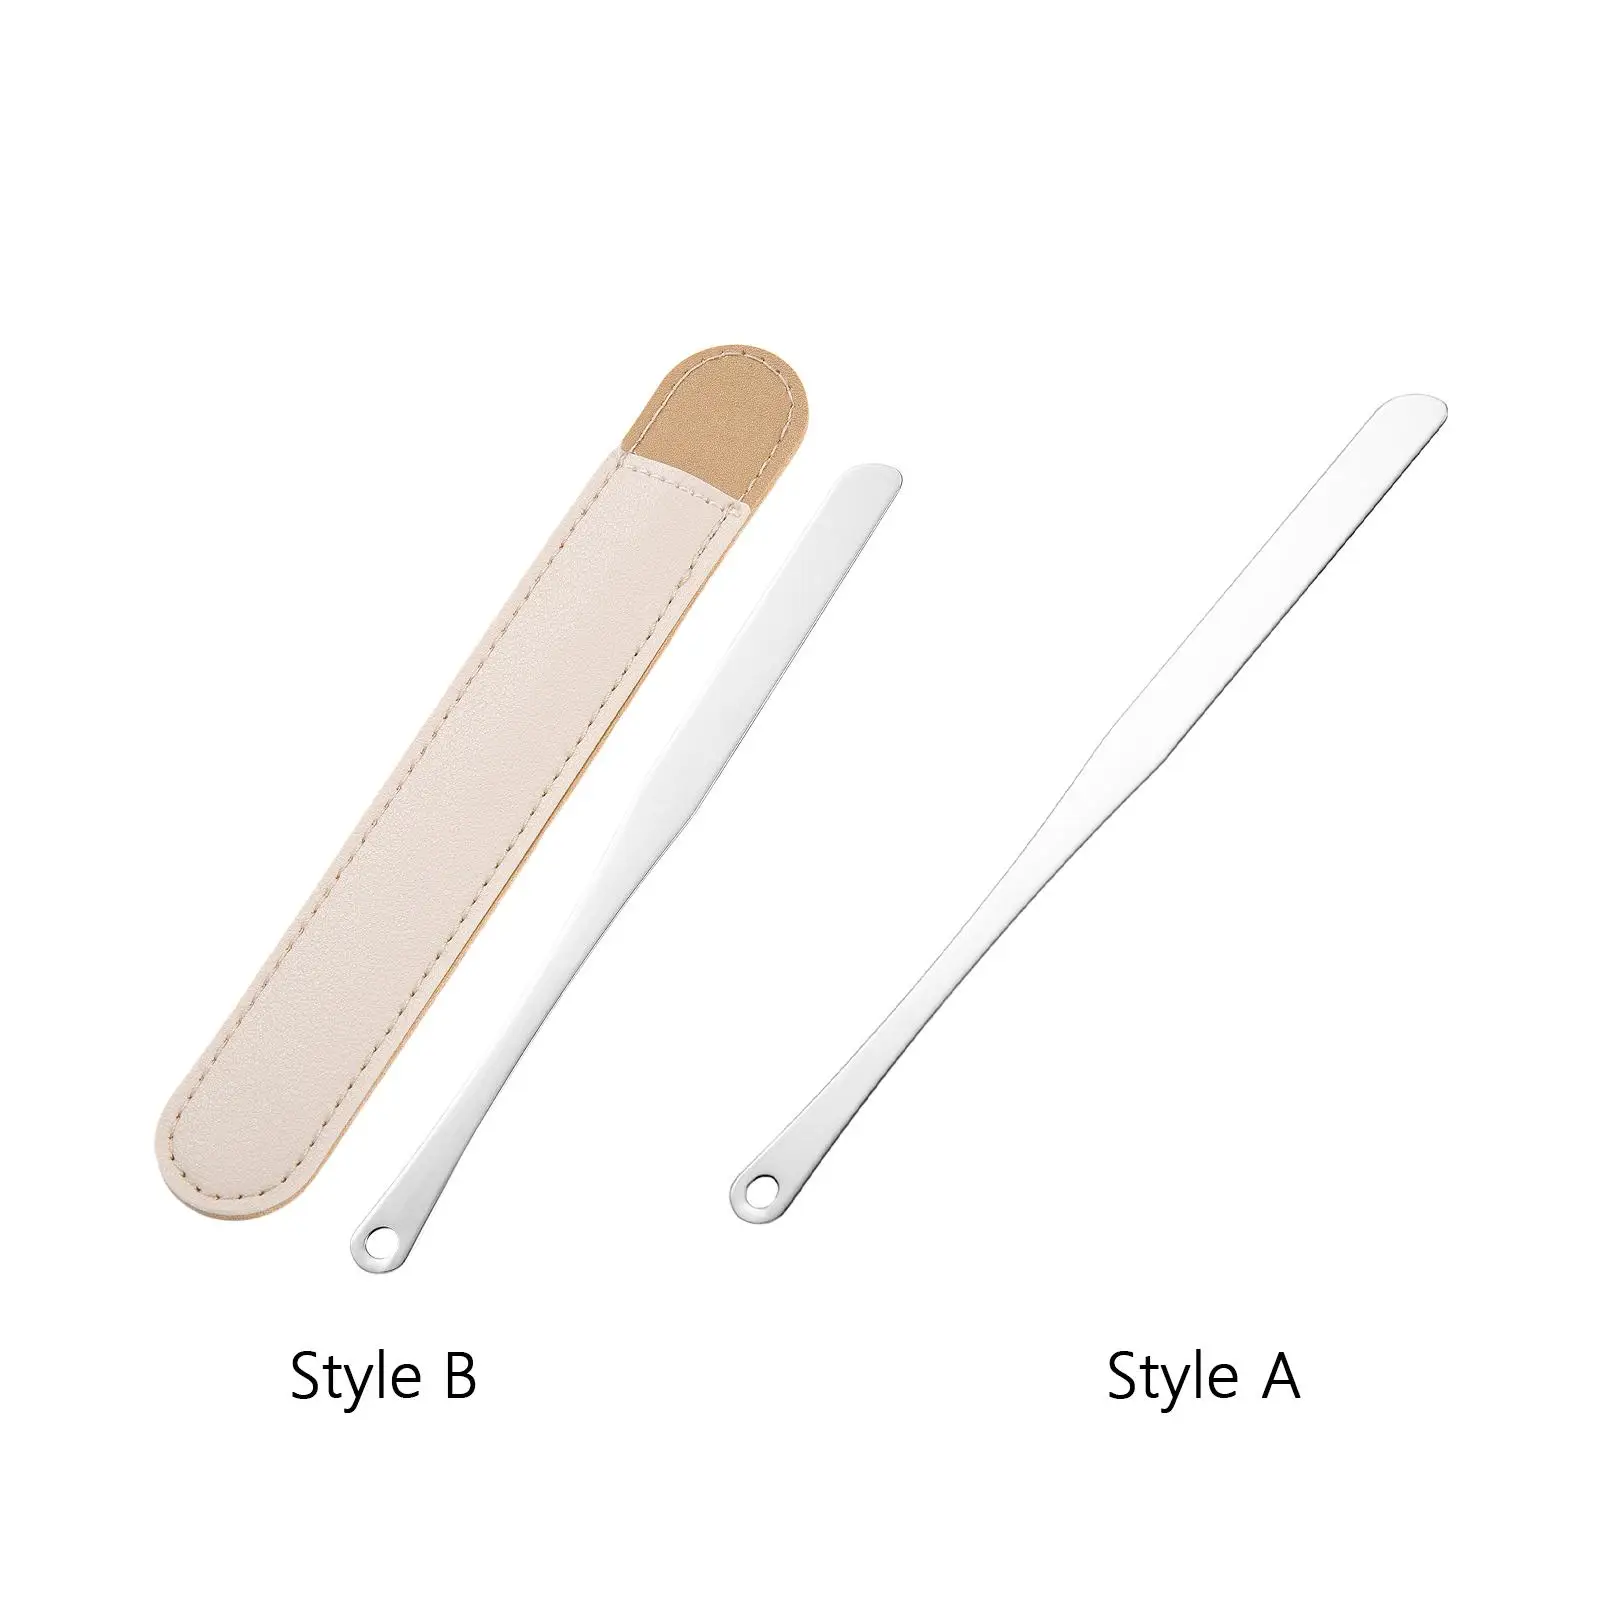 Makeup Spatulas Cosmetics Mixing spade Accessories Multipurpose Cosmetic Paddle Rod for Mixing and Sampling Beginner